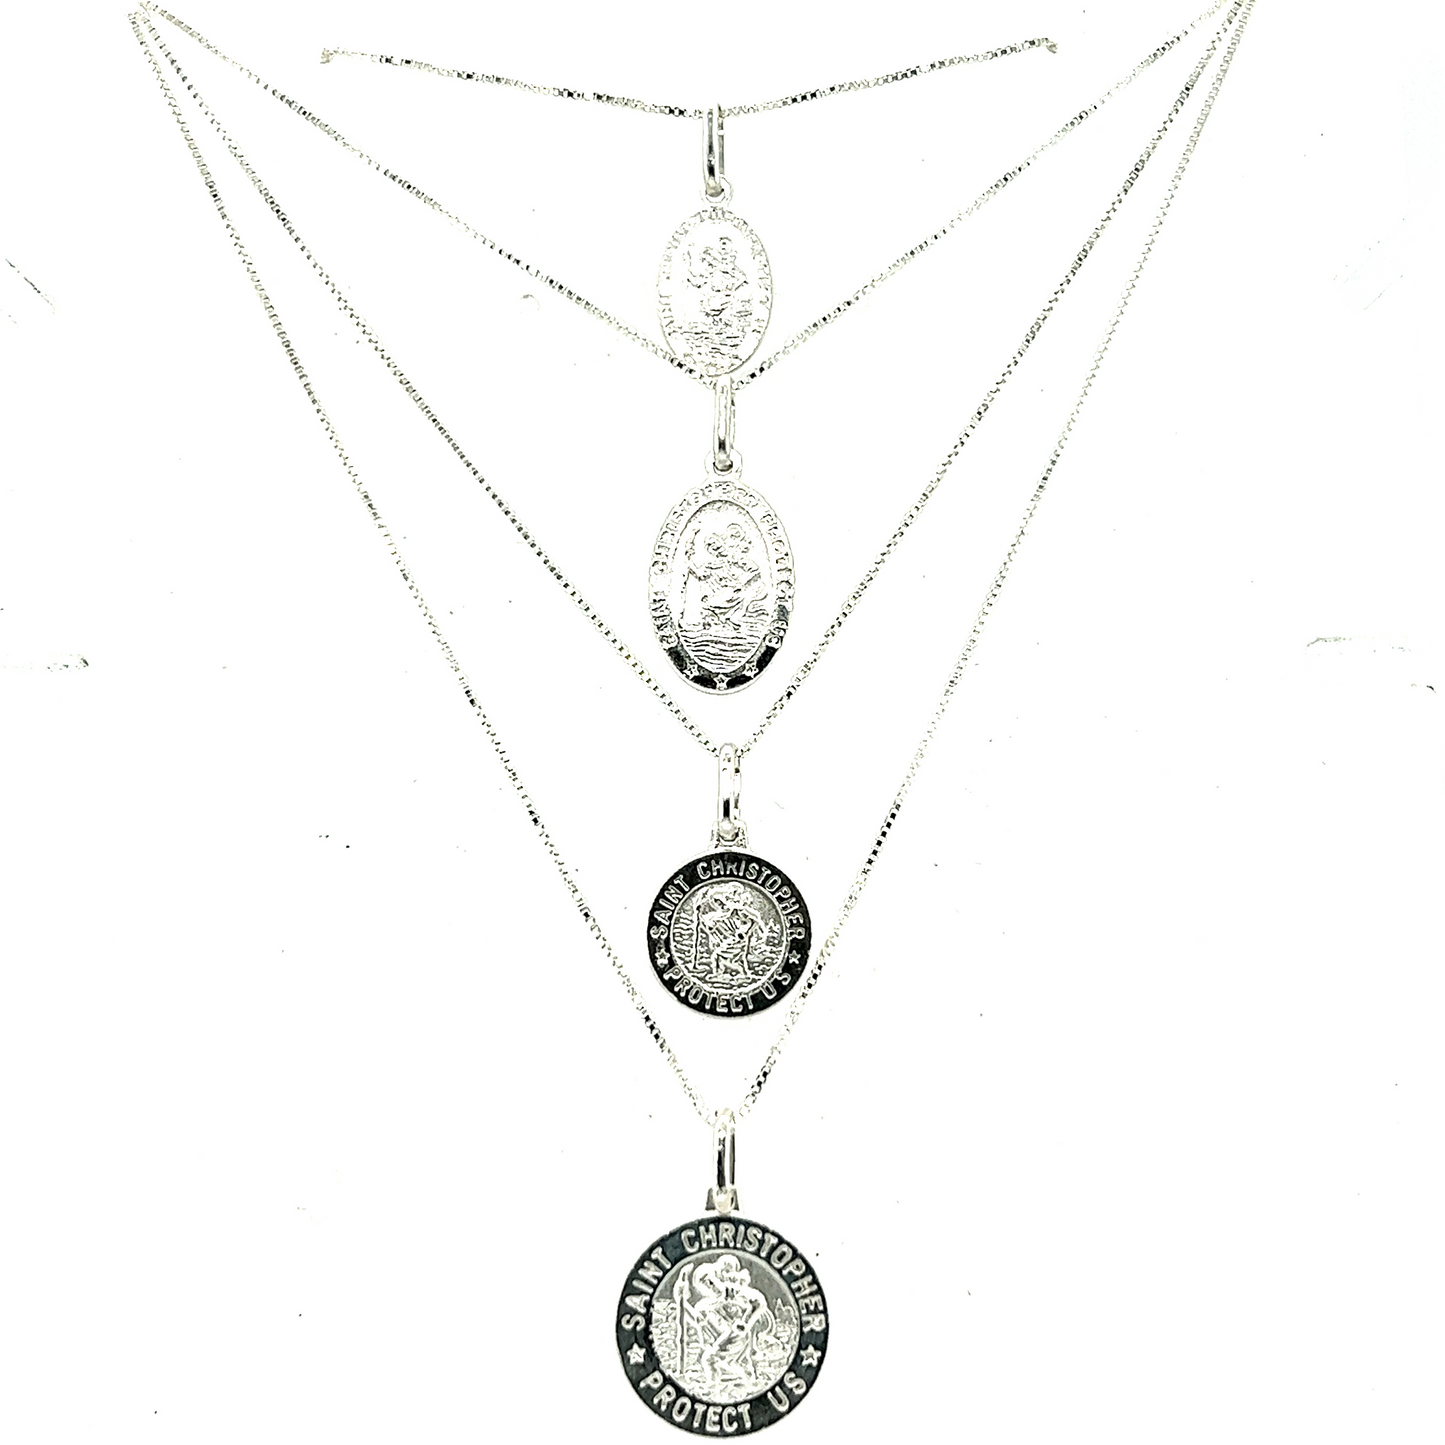 A silver necklace with three Super Silver Saint Christopher Medallions In Various Sizes, the patron saint of travelers, on it.